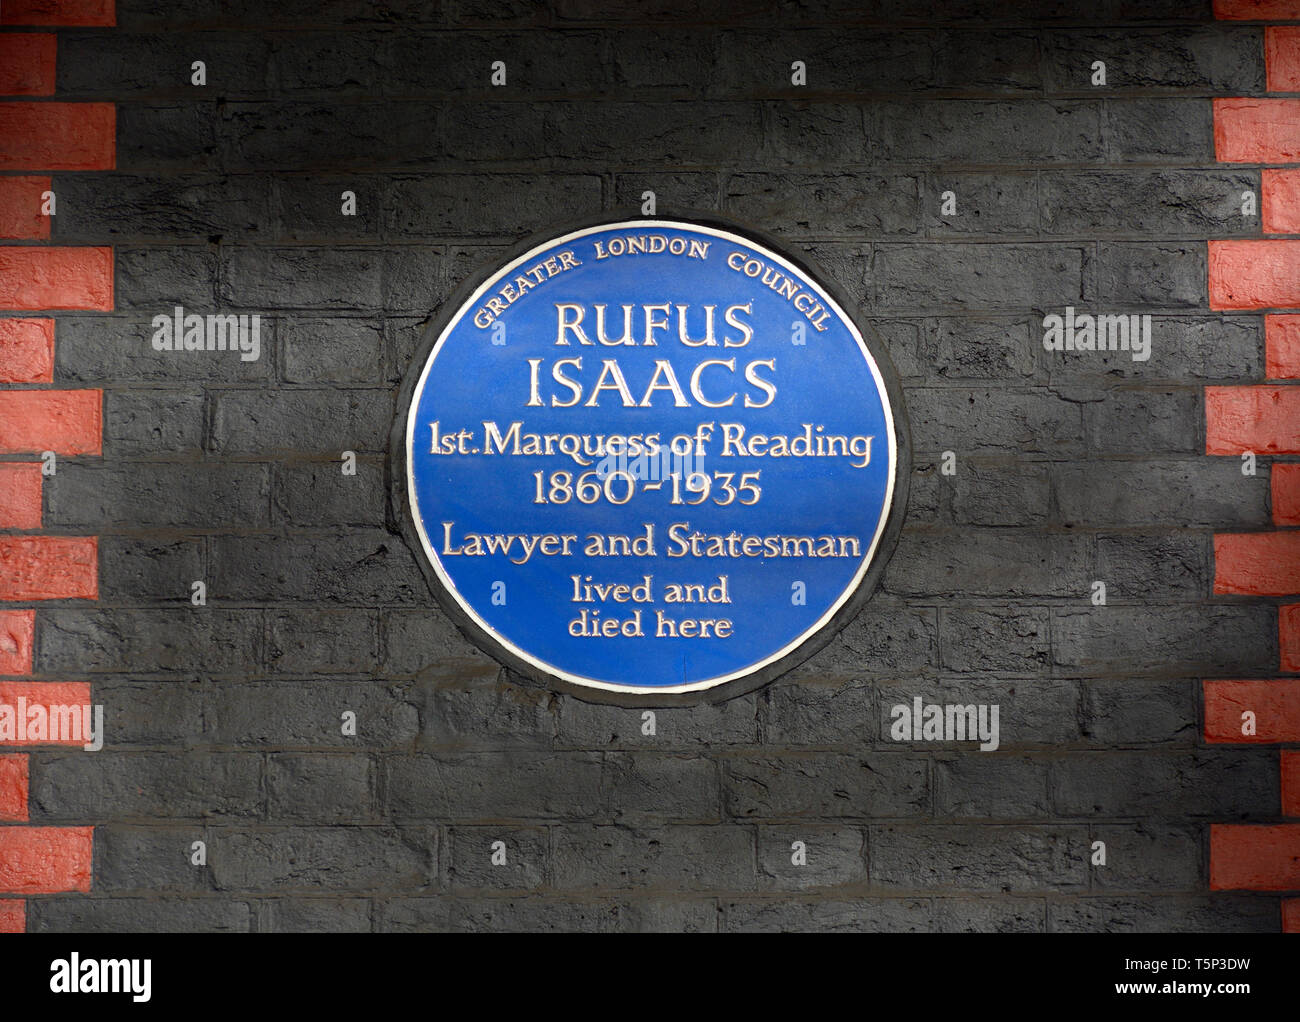 London, England, UK. Commemorative Blue Plaque: Rufus Isaacs, 1st Marquess of Reading (1860-1935) lawyer and statesman, lived and died here. 32 Curzon Stock Photo